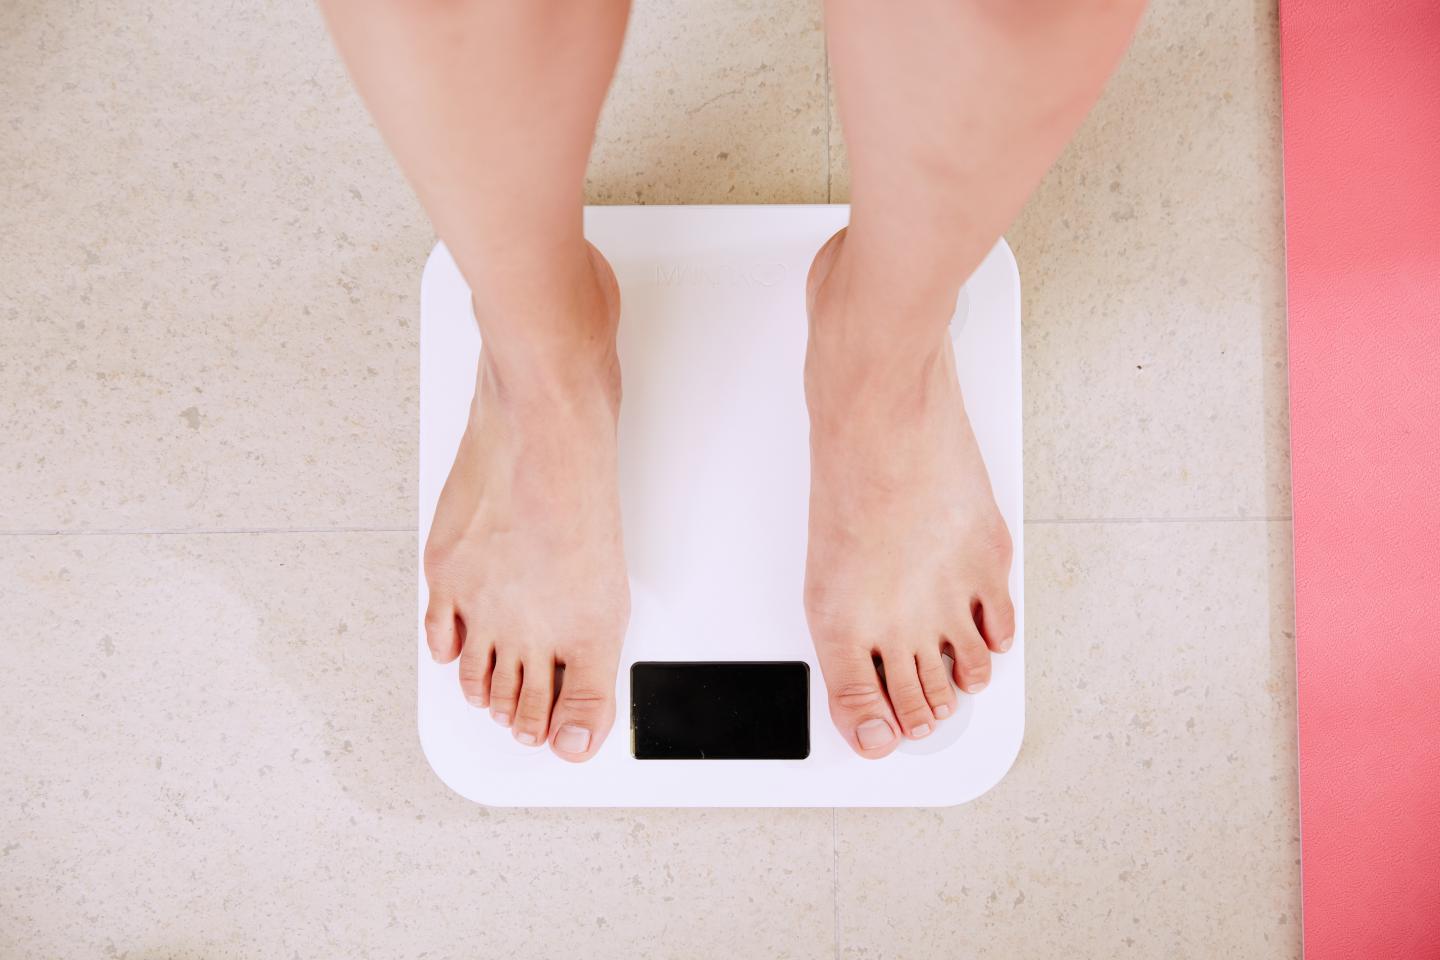 Factors that Predict Obesity by Adolescence Revealed